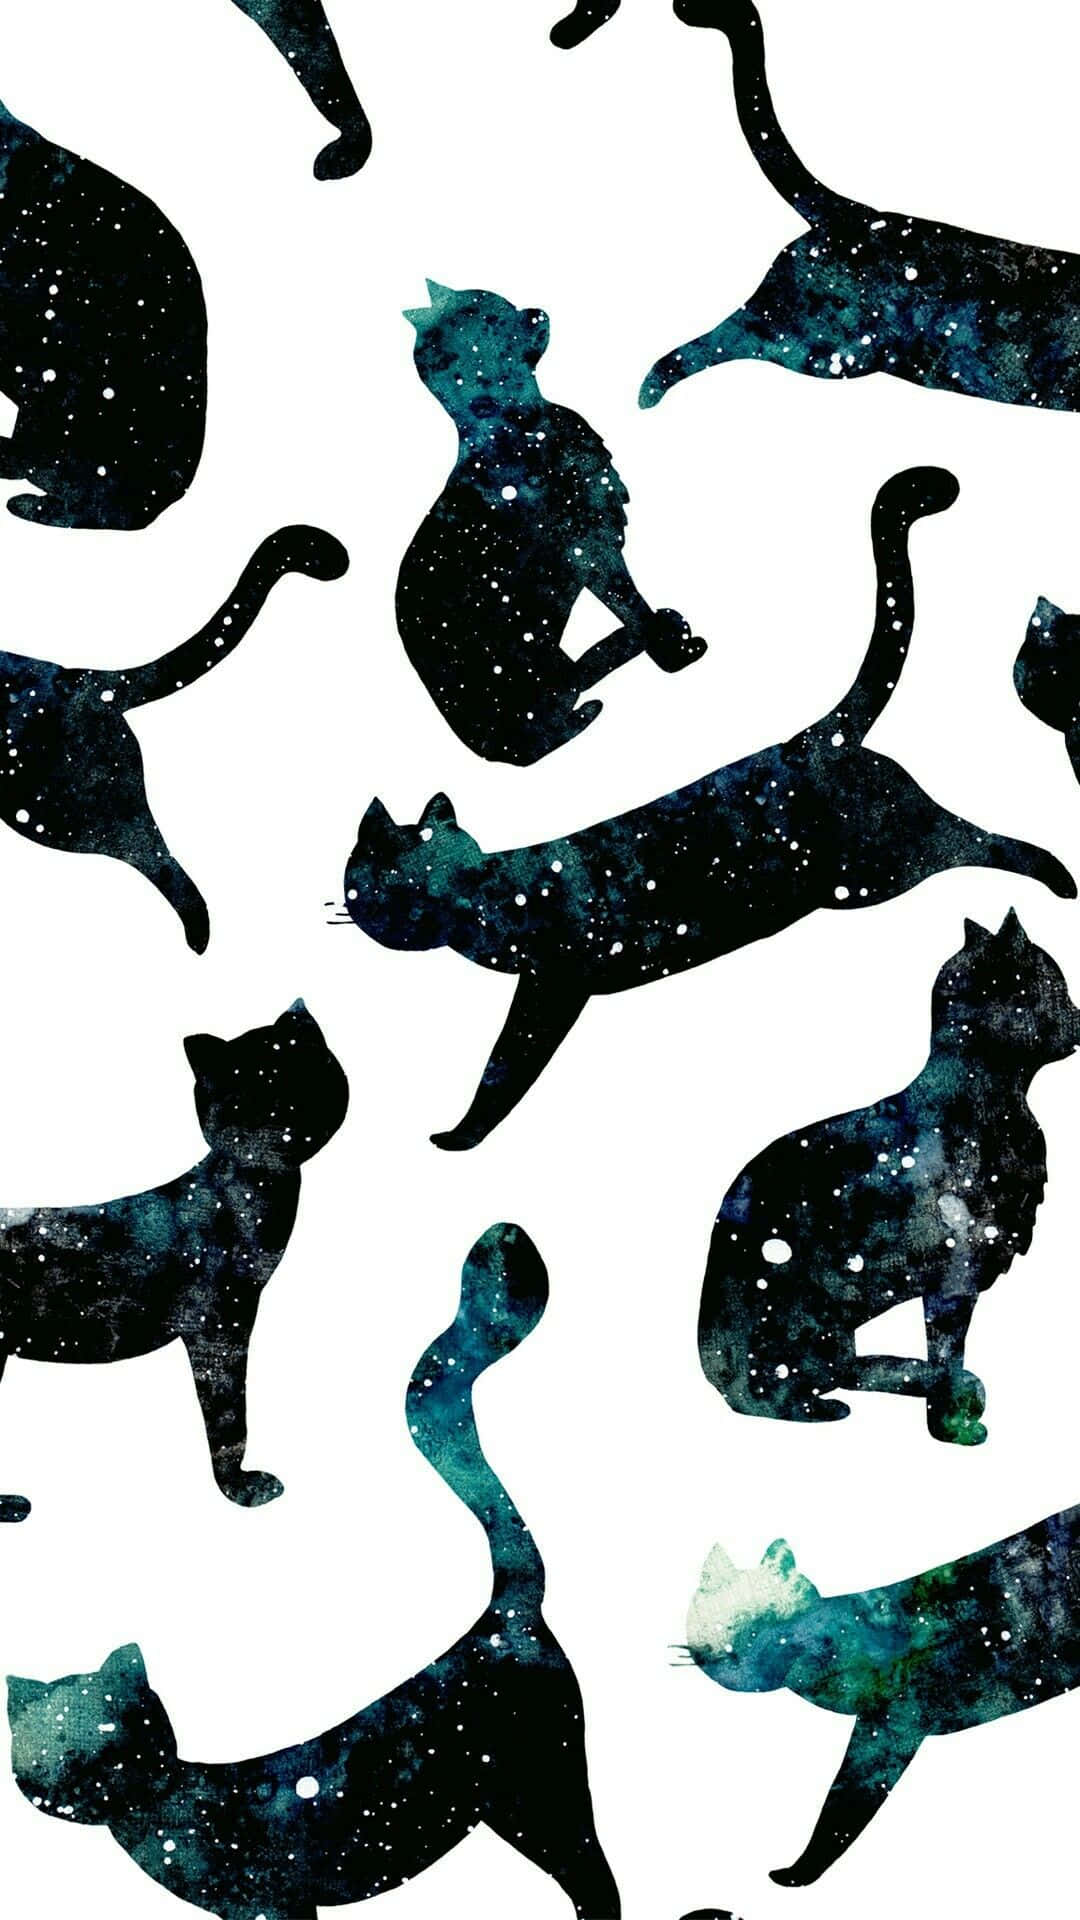 Explore the boundless mystery of space and the strangeness of your own galaxy cat Wallpaper